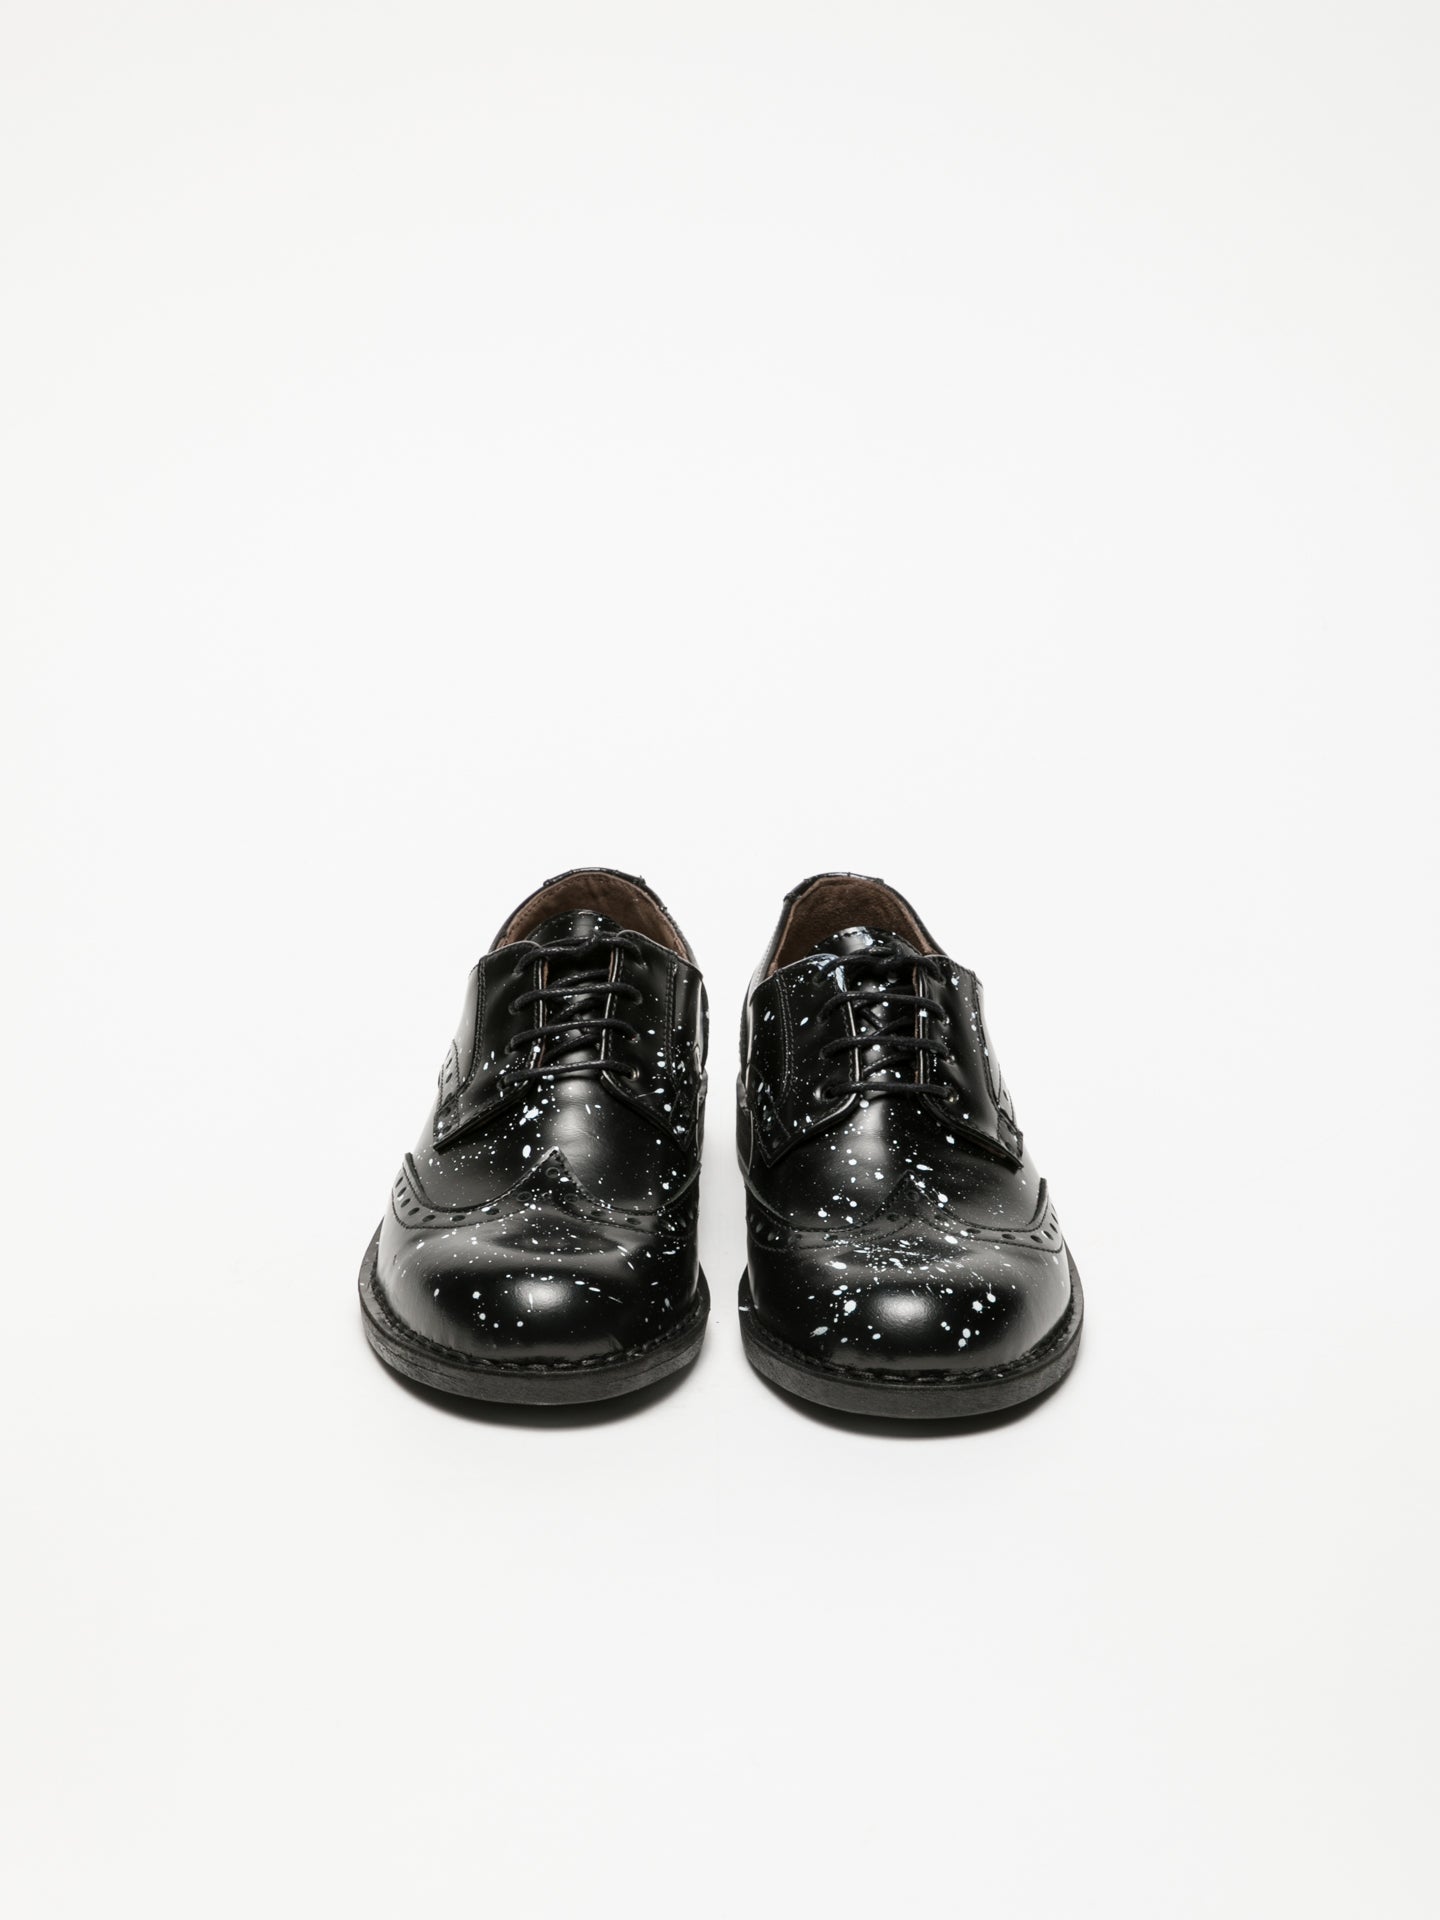 Fly London Black Derby Shoes